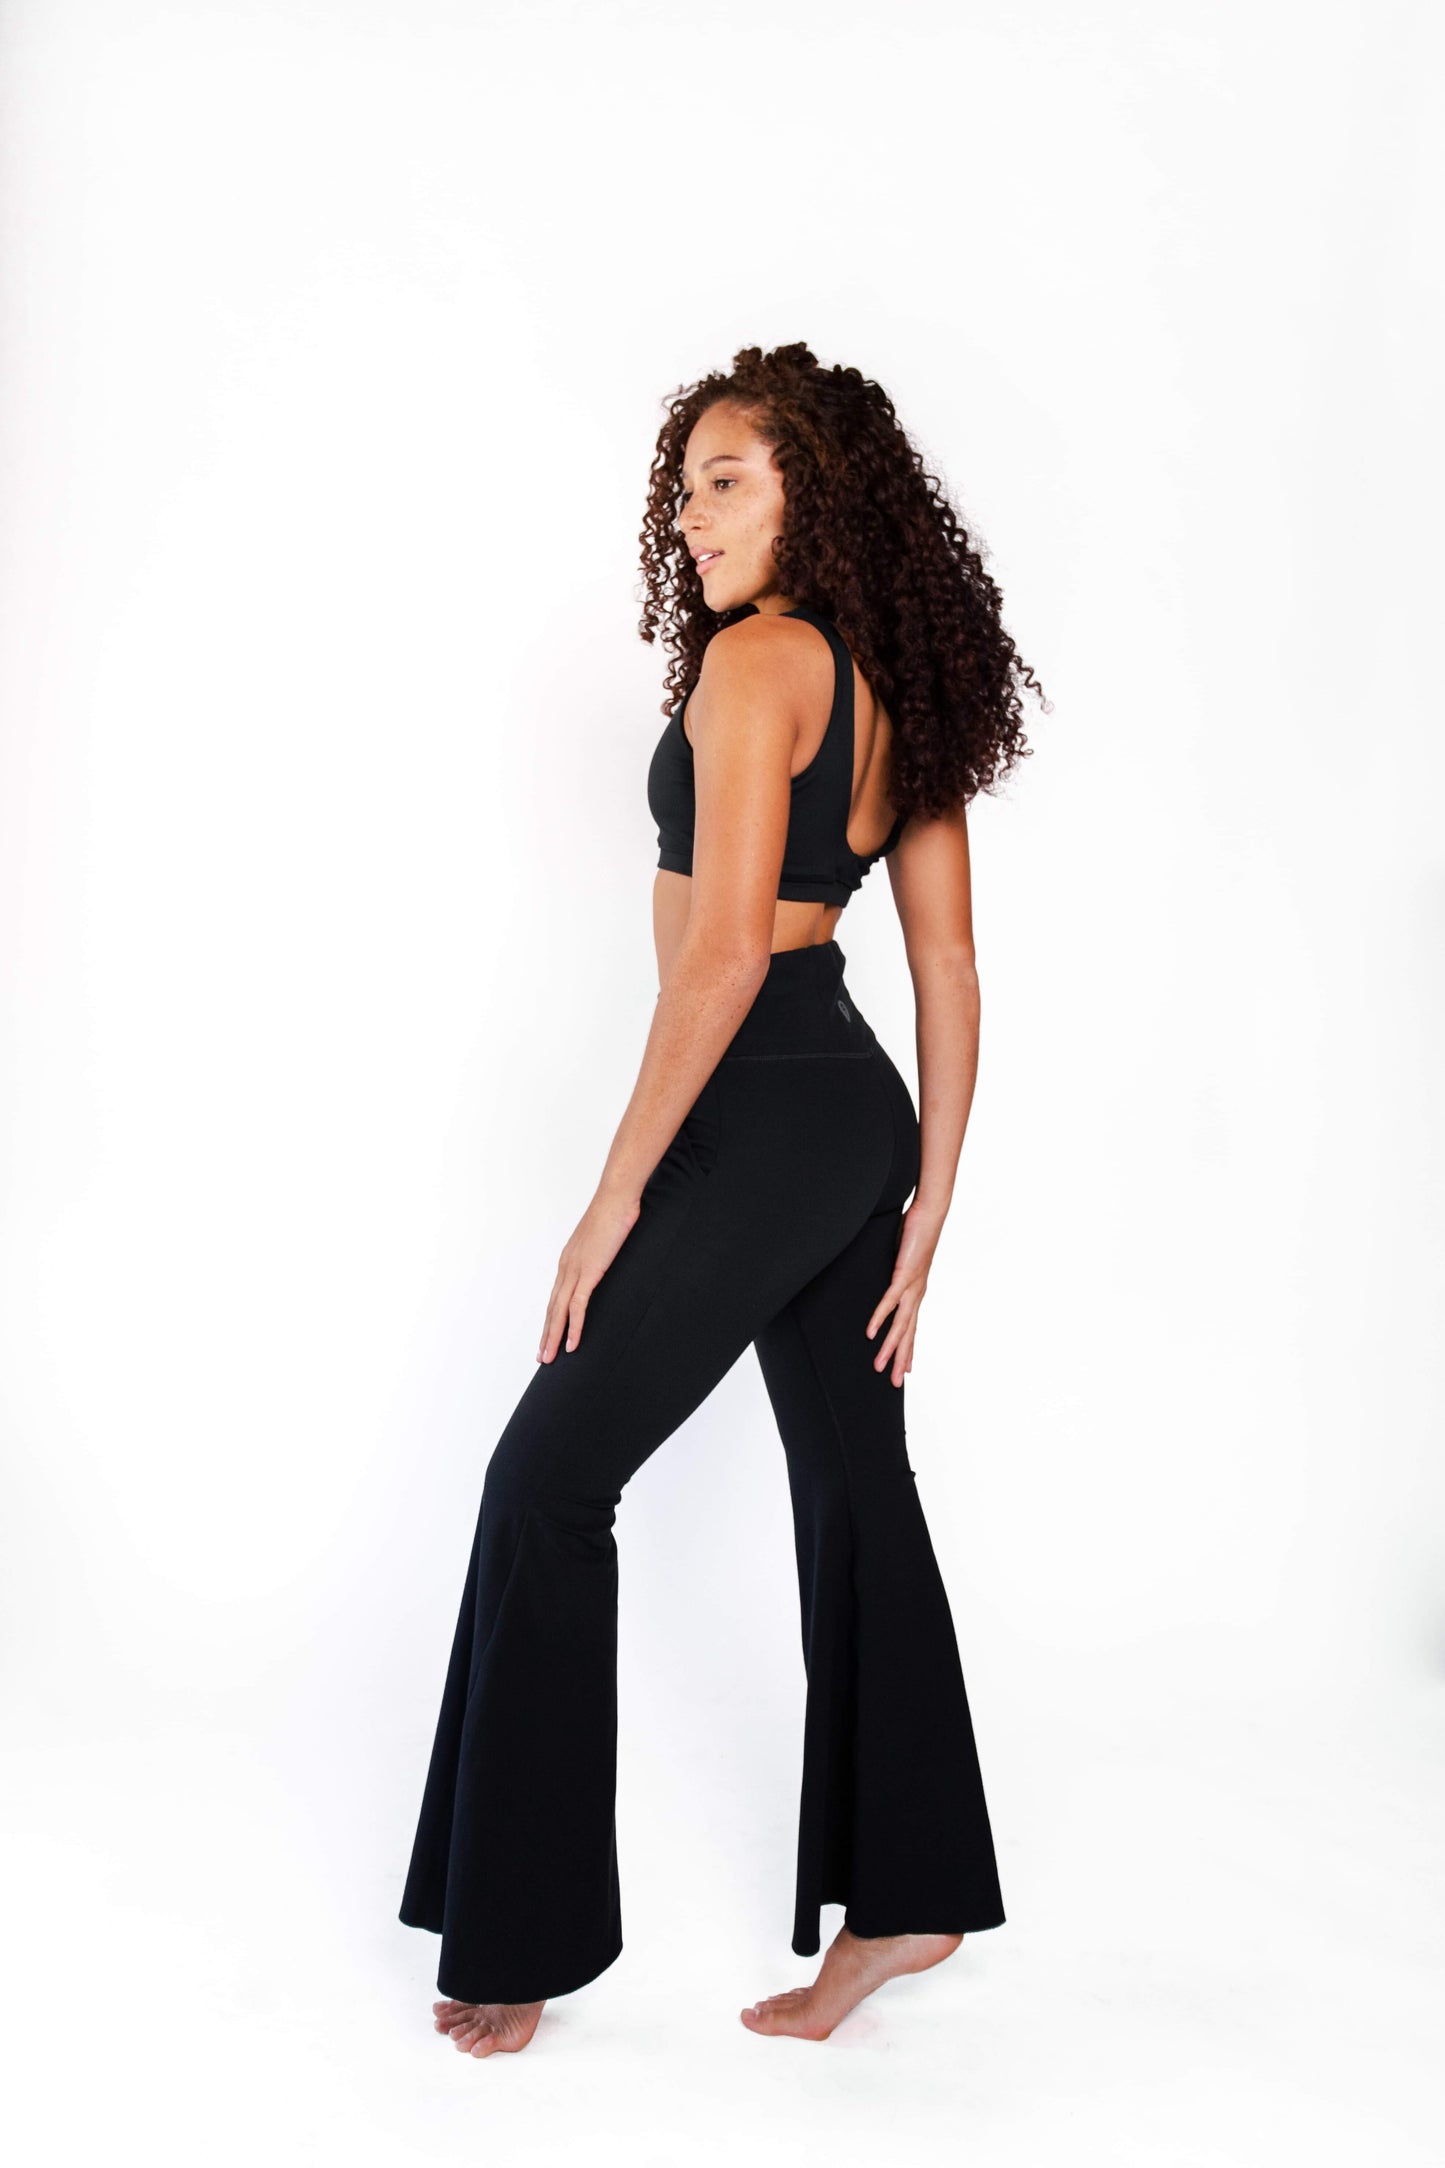 Bell Bottoms 2.0 in Jet Black by Yoga Democracy